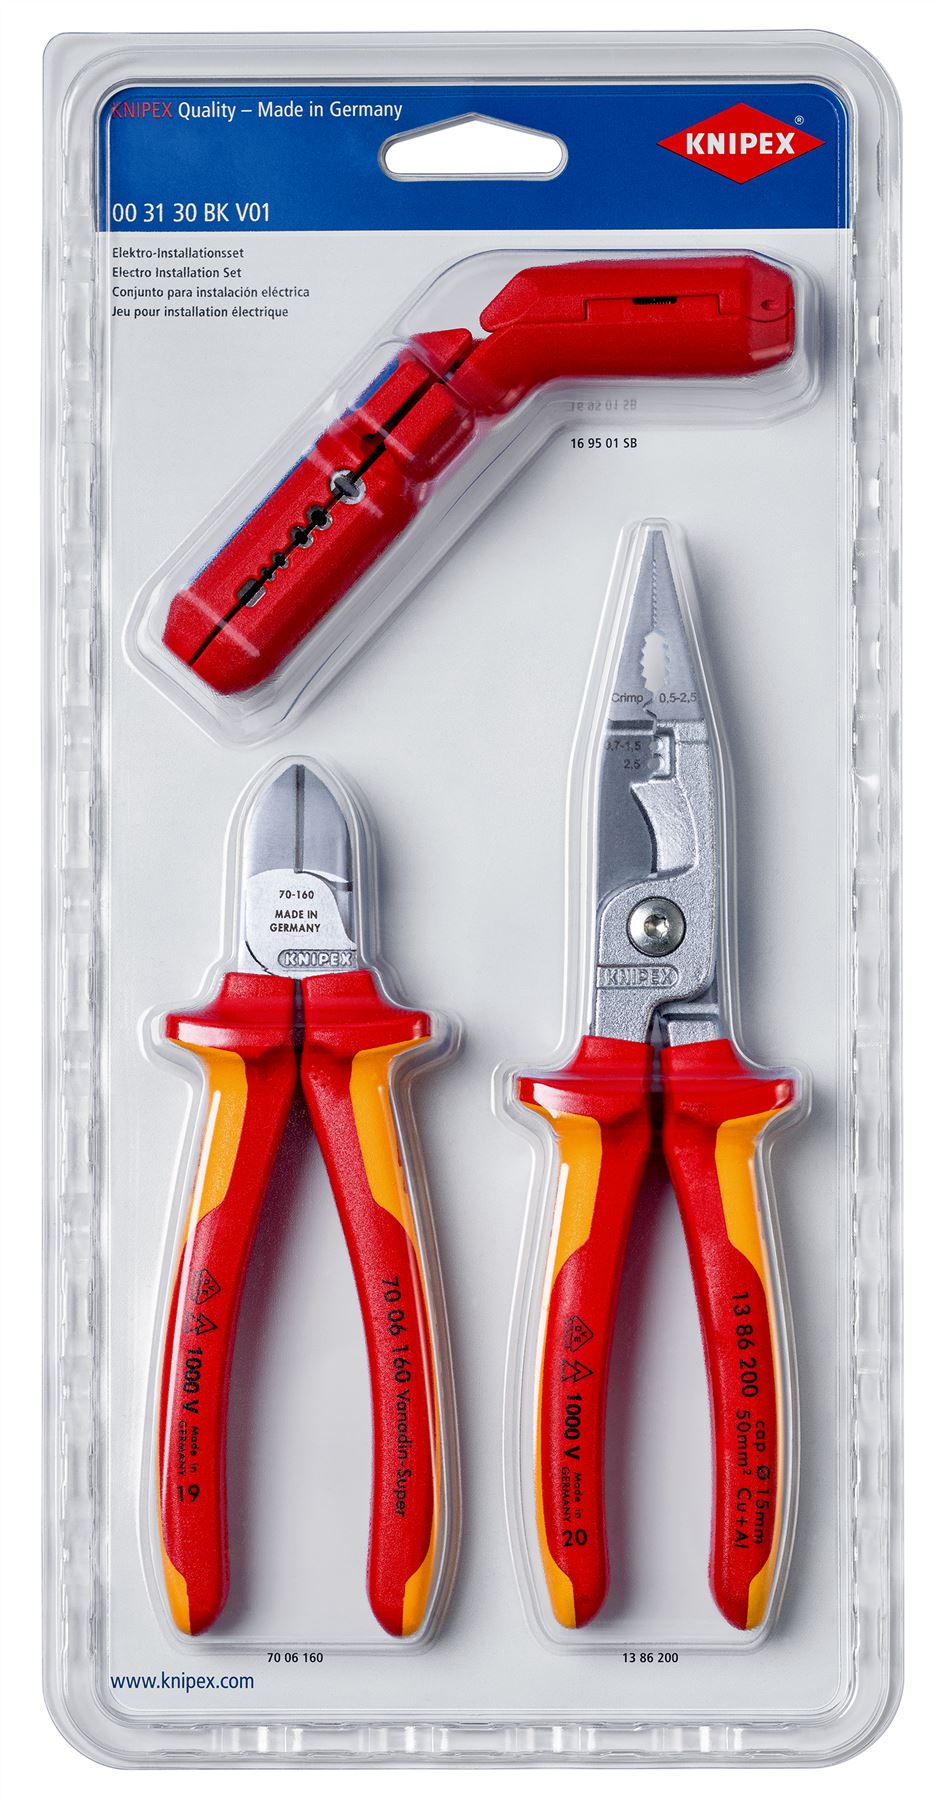 Knipex Electro Electrical Installation Set 3 Piece Kit ErgoStrip 160mm Diagonal Cutters Pliers 00 31 30 BK V01